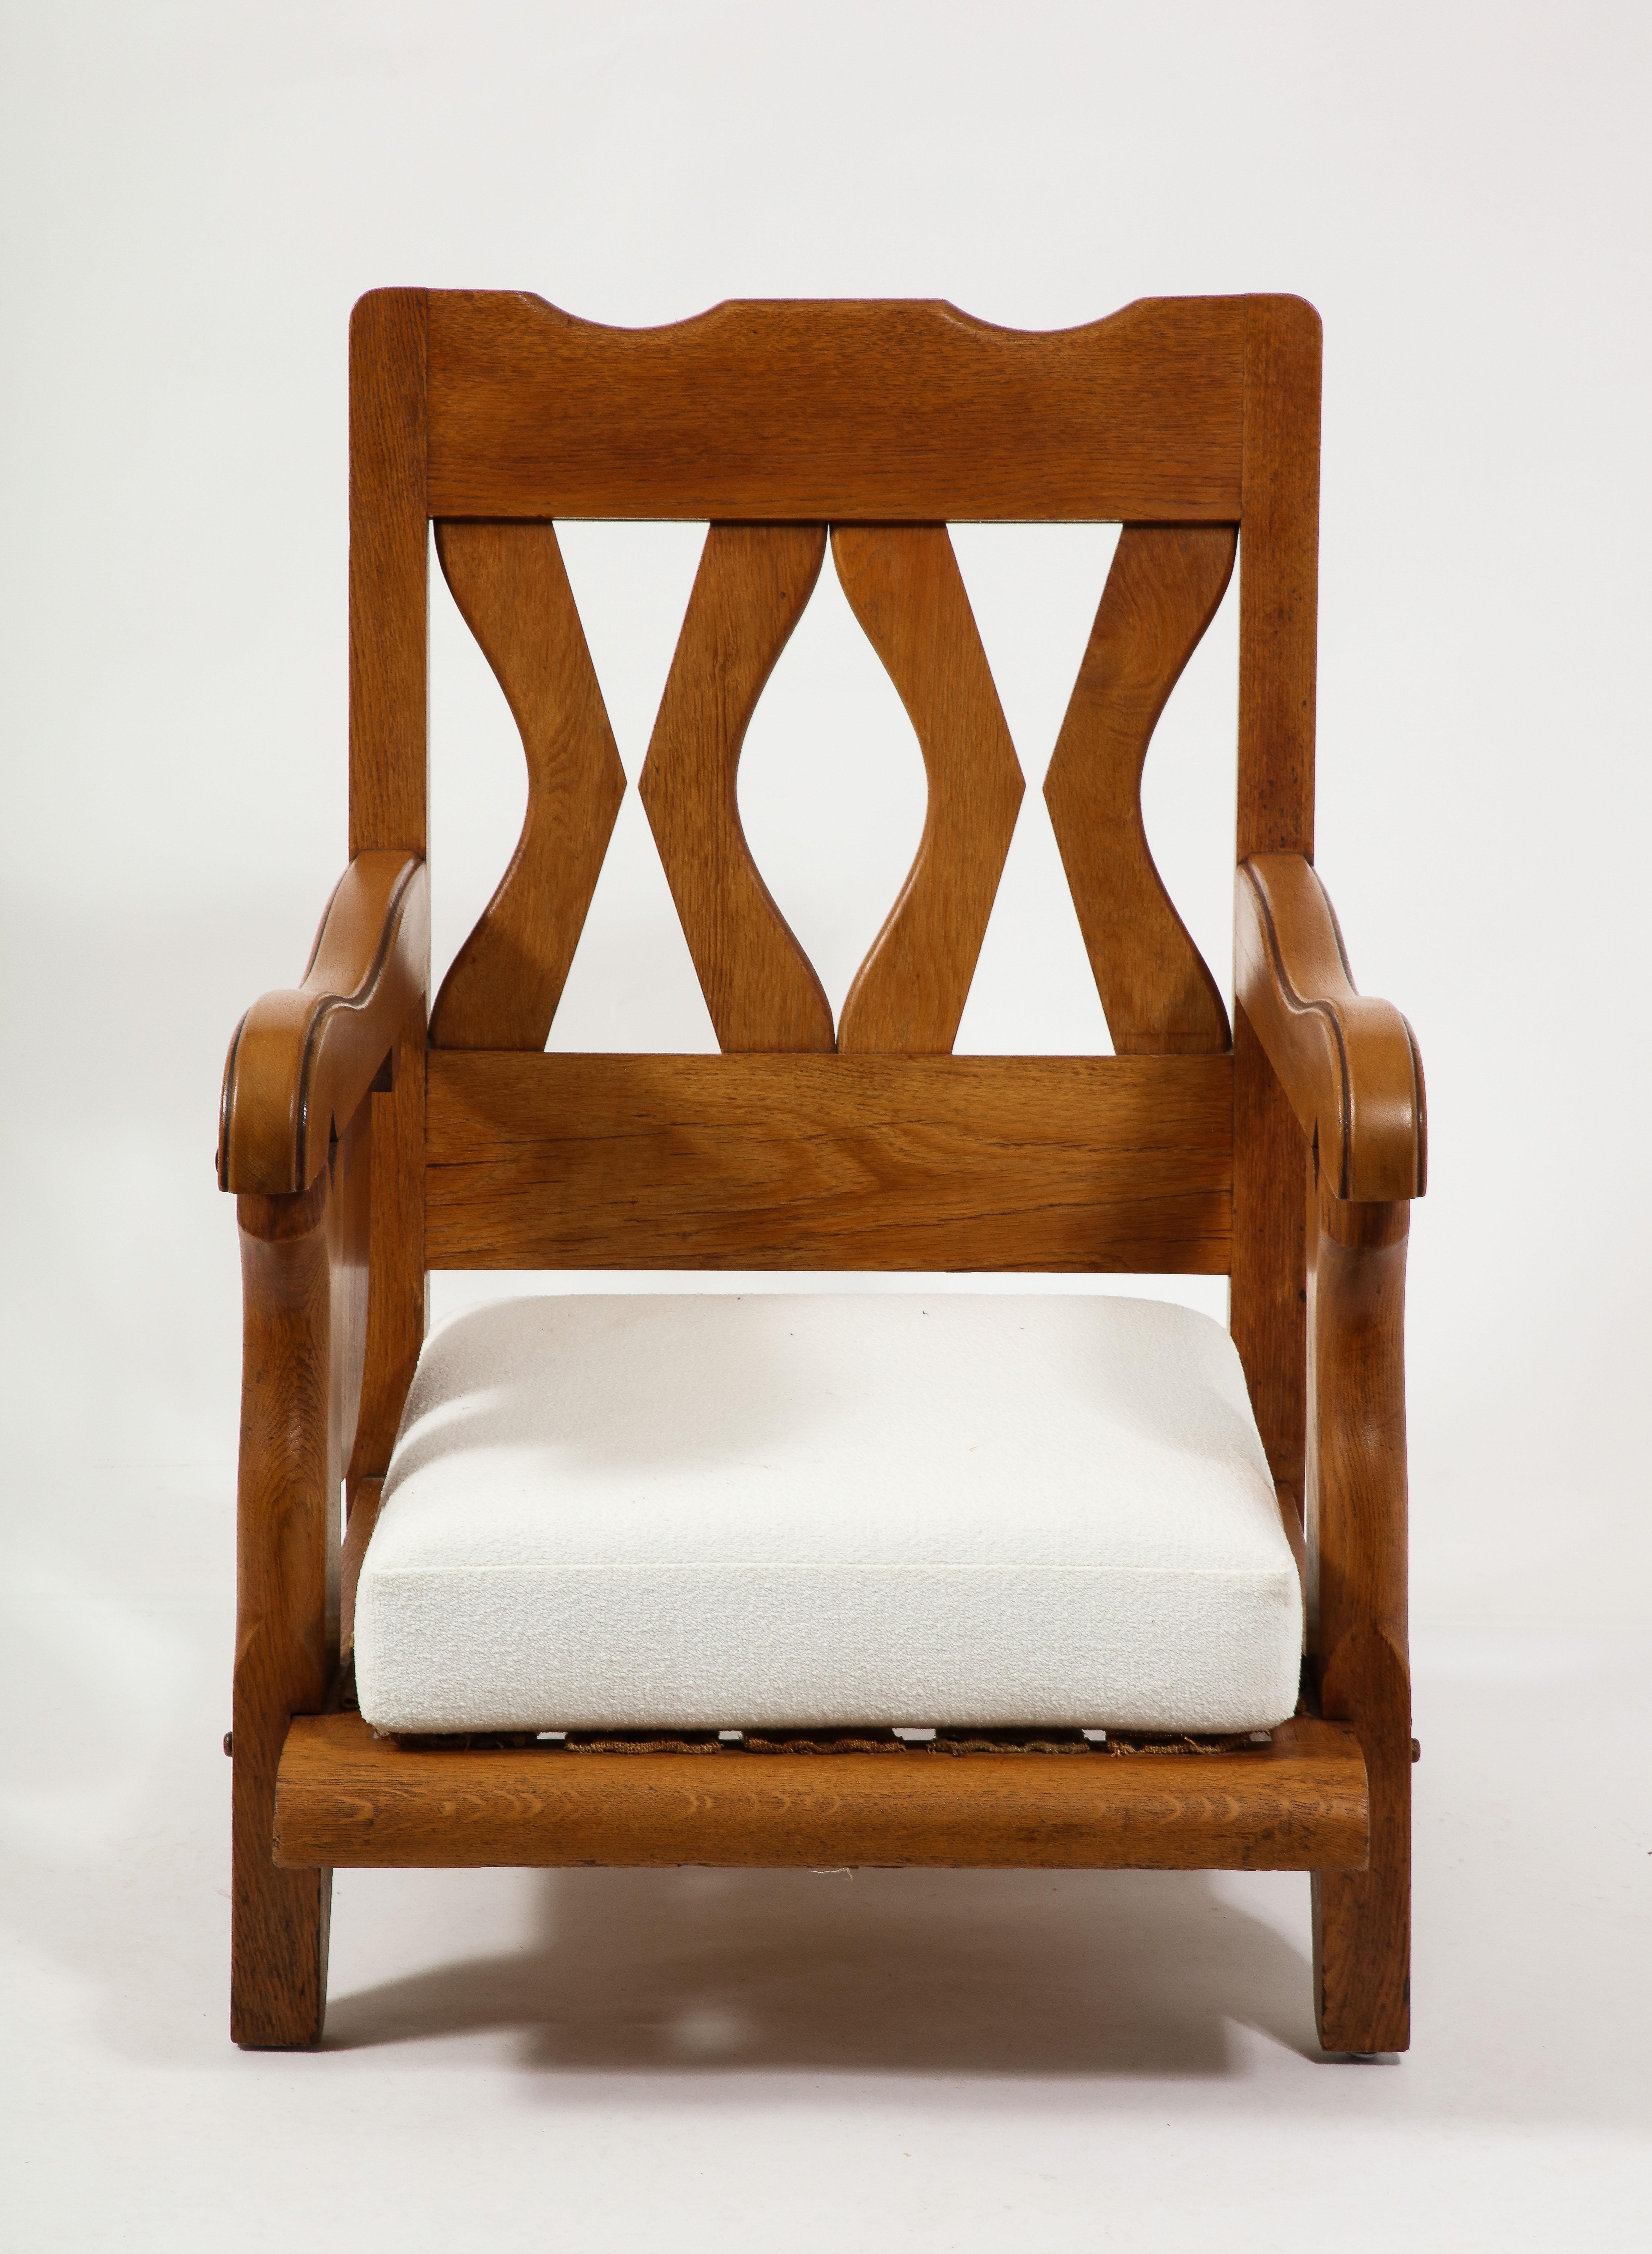 Large Oak Gentleman chair with a foldable drink tray, elegant construction, and joinery.
The chair has since been reupholstered, new photos coming soon.
